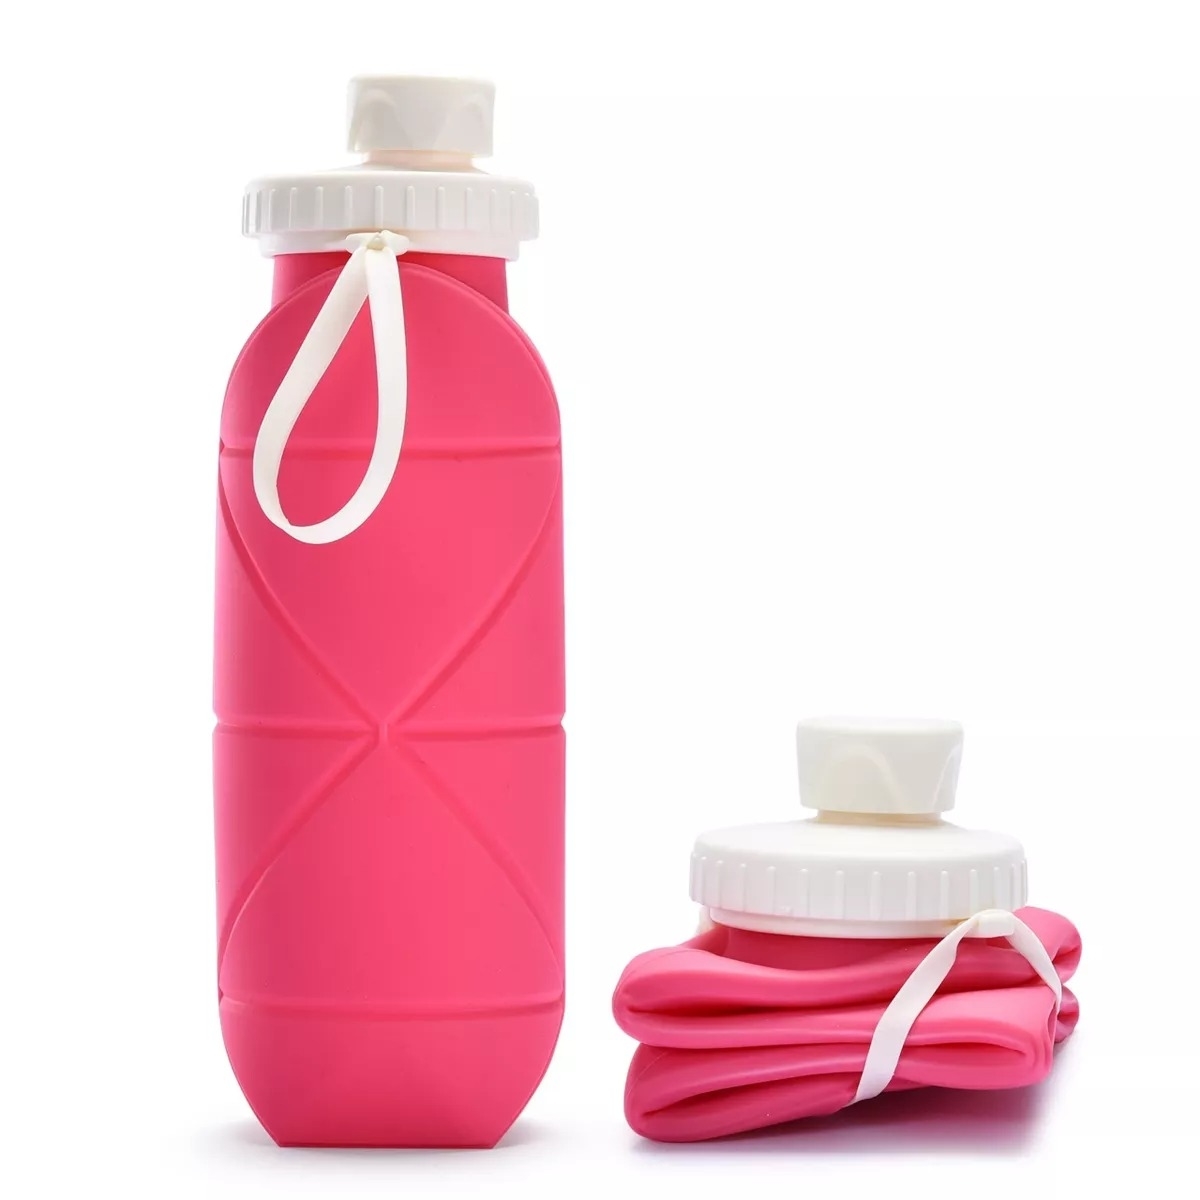 Collapsible silicone water bottle shown expanded and folded next to its lid